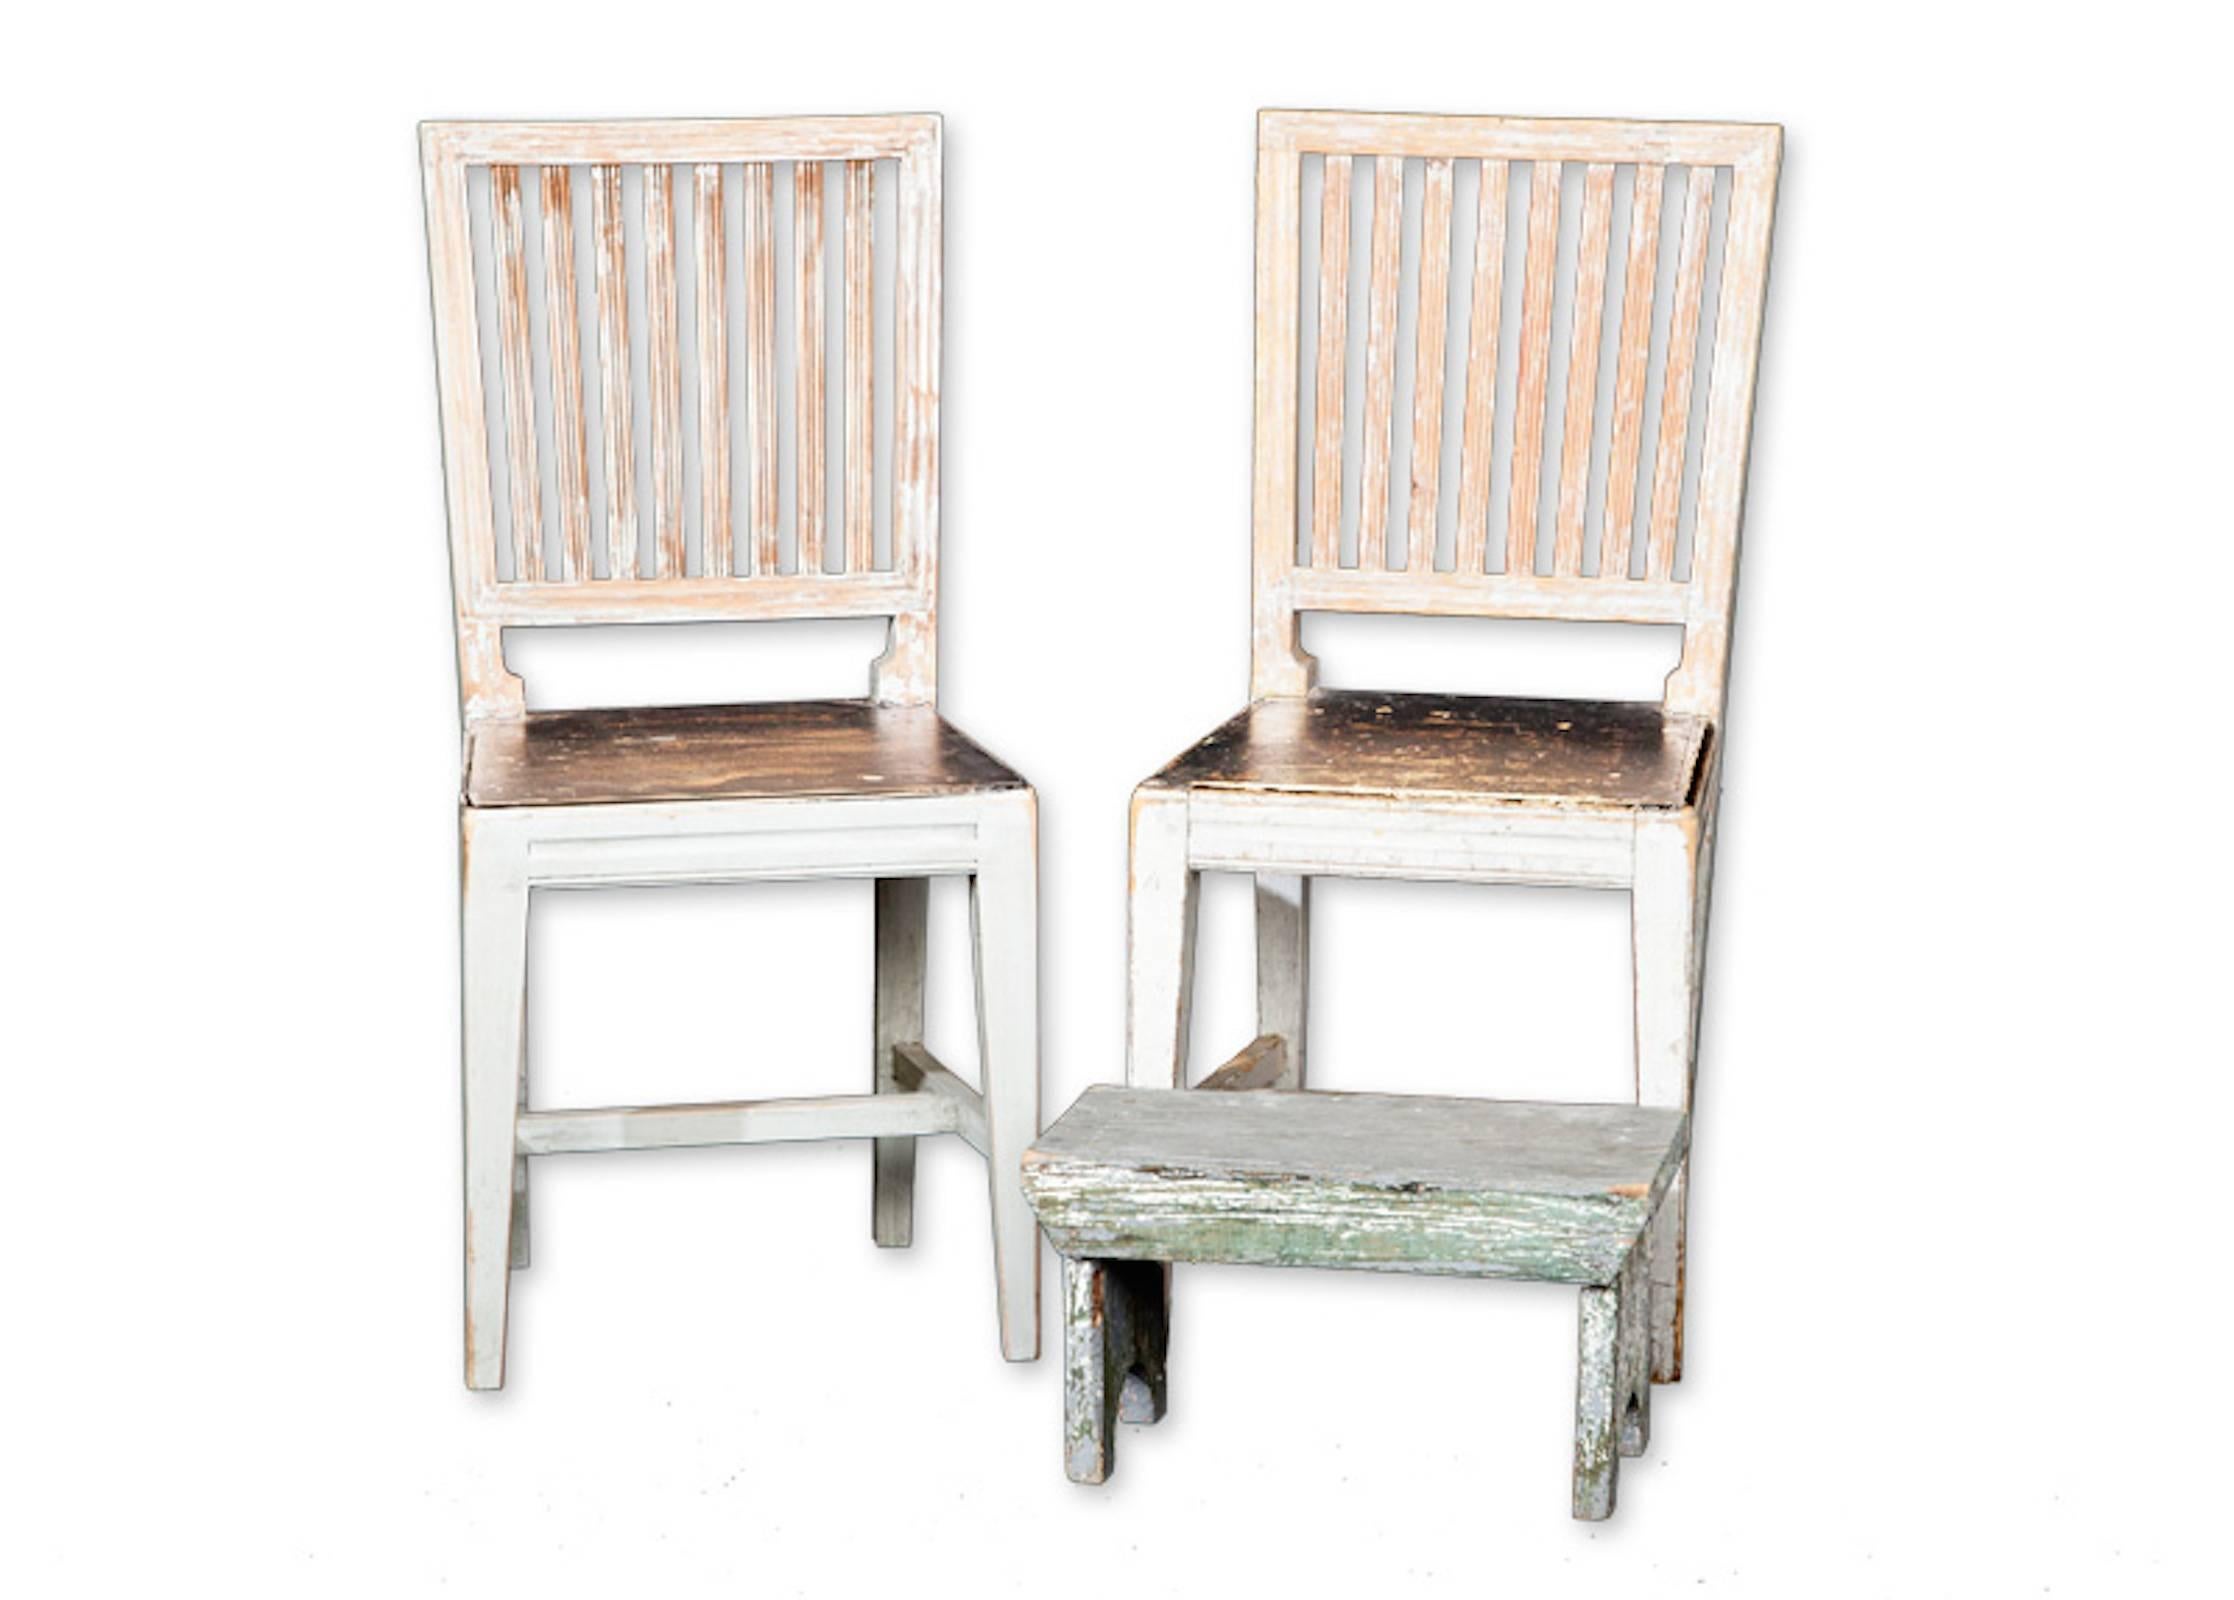 Reproduction Swedish style country side and armchairs. Paint color and dimensions to customers specification.
$747 side chair each.
$847 arm chair each.